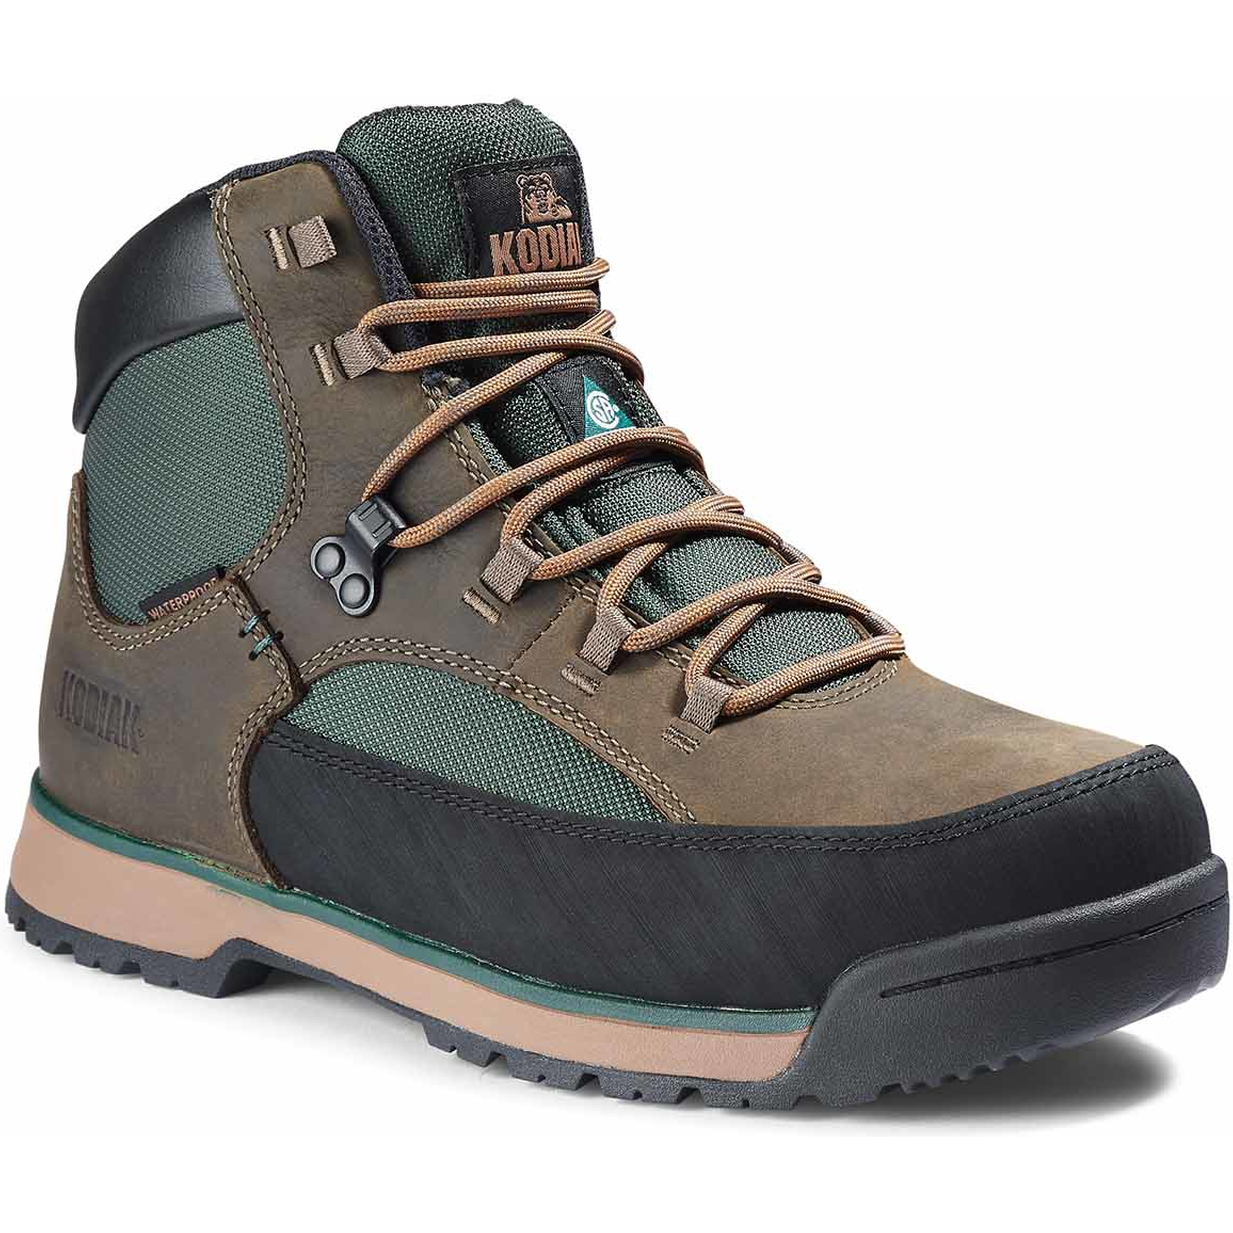 Steel Toe Hiking Boots: The Best Work Boot for Hiking